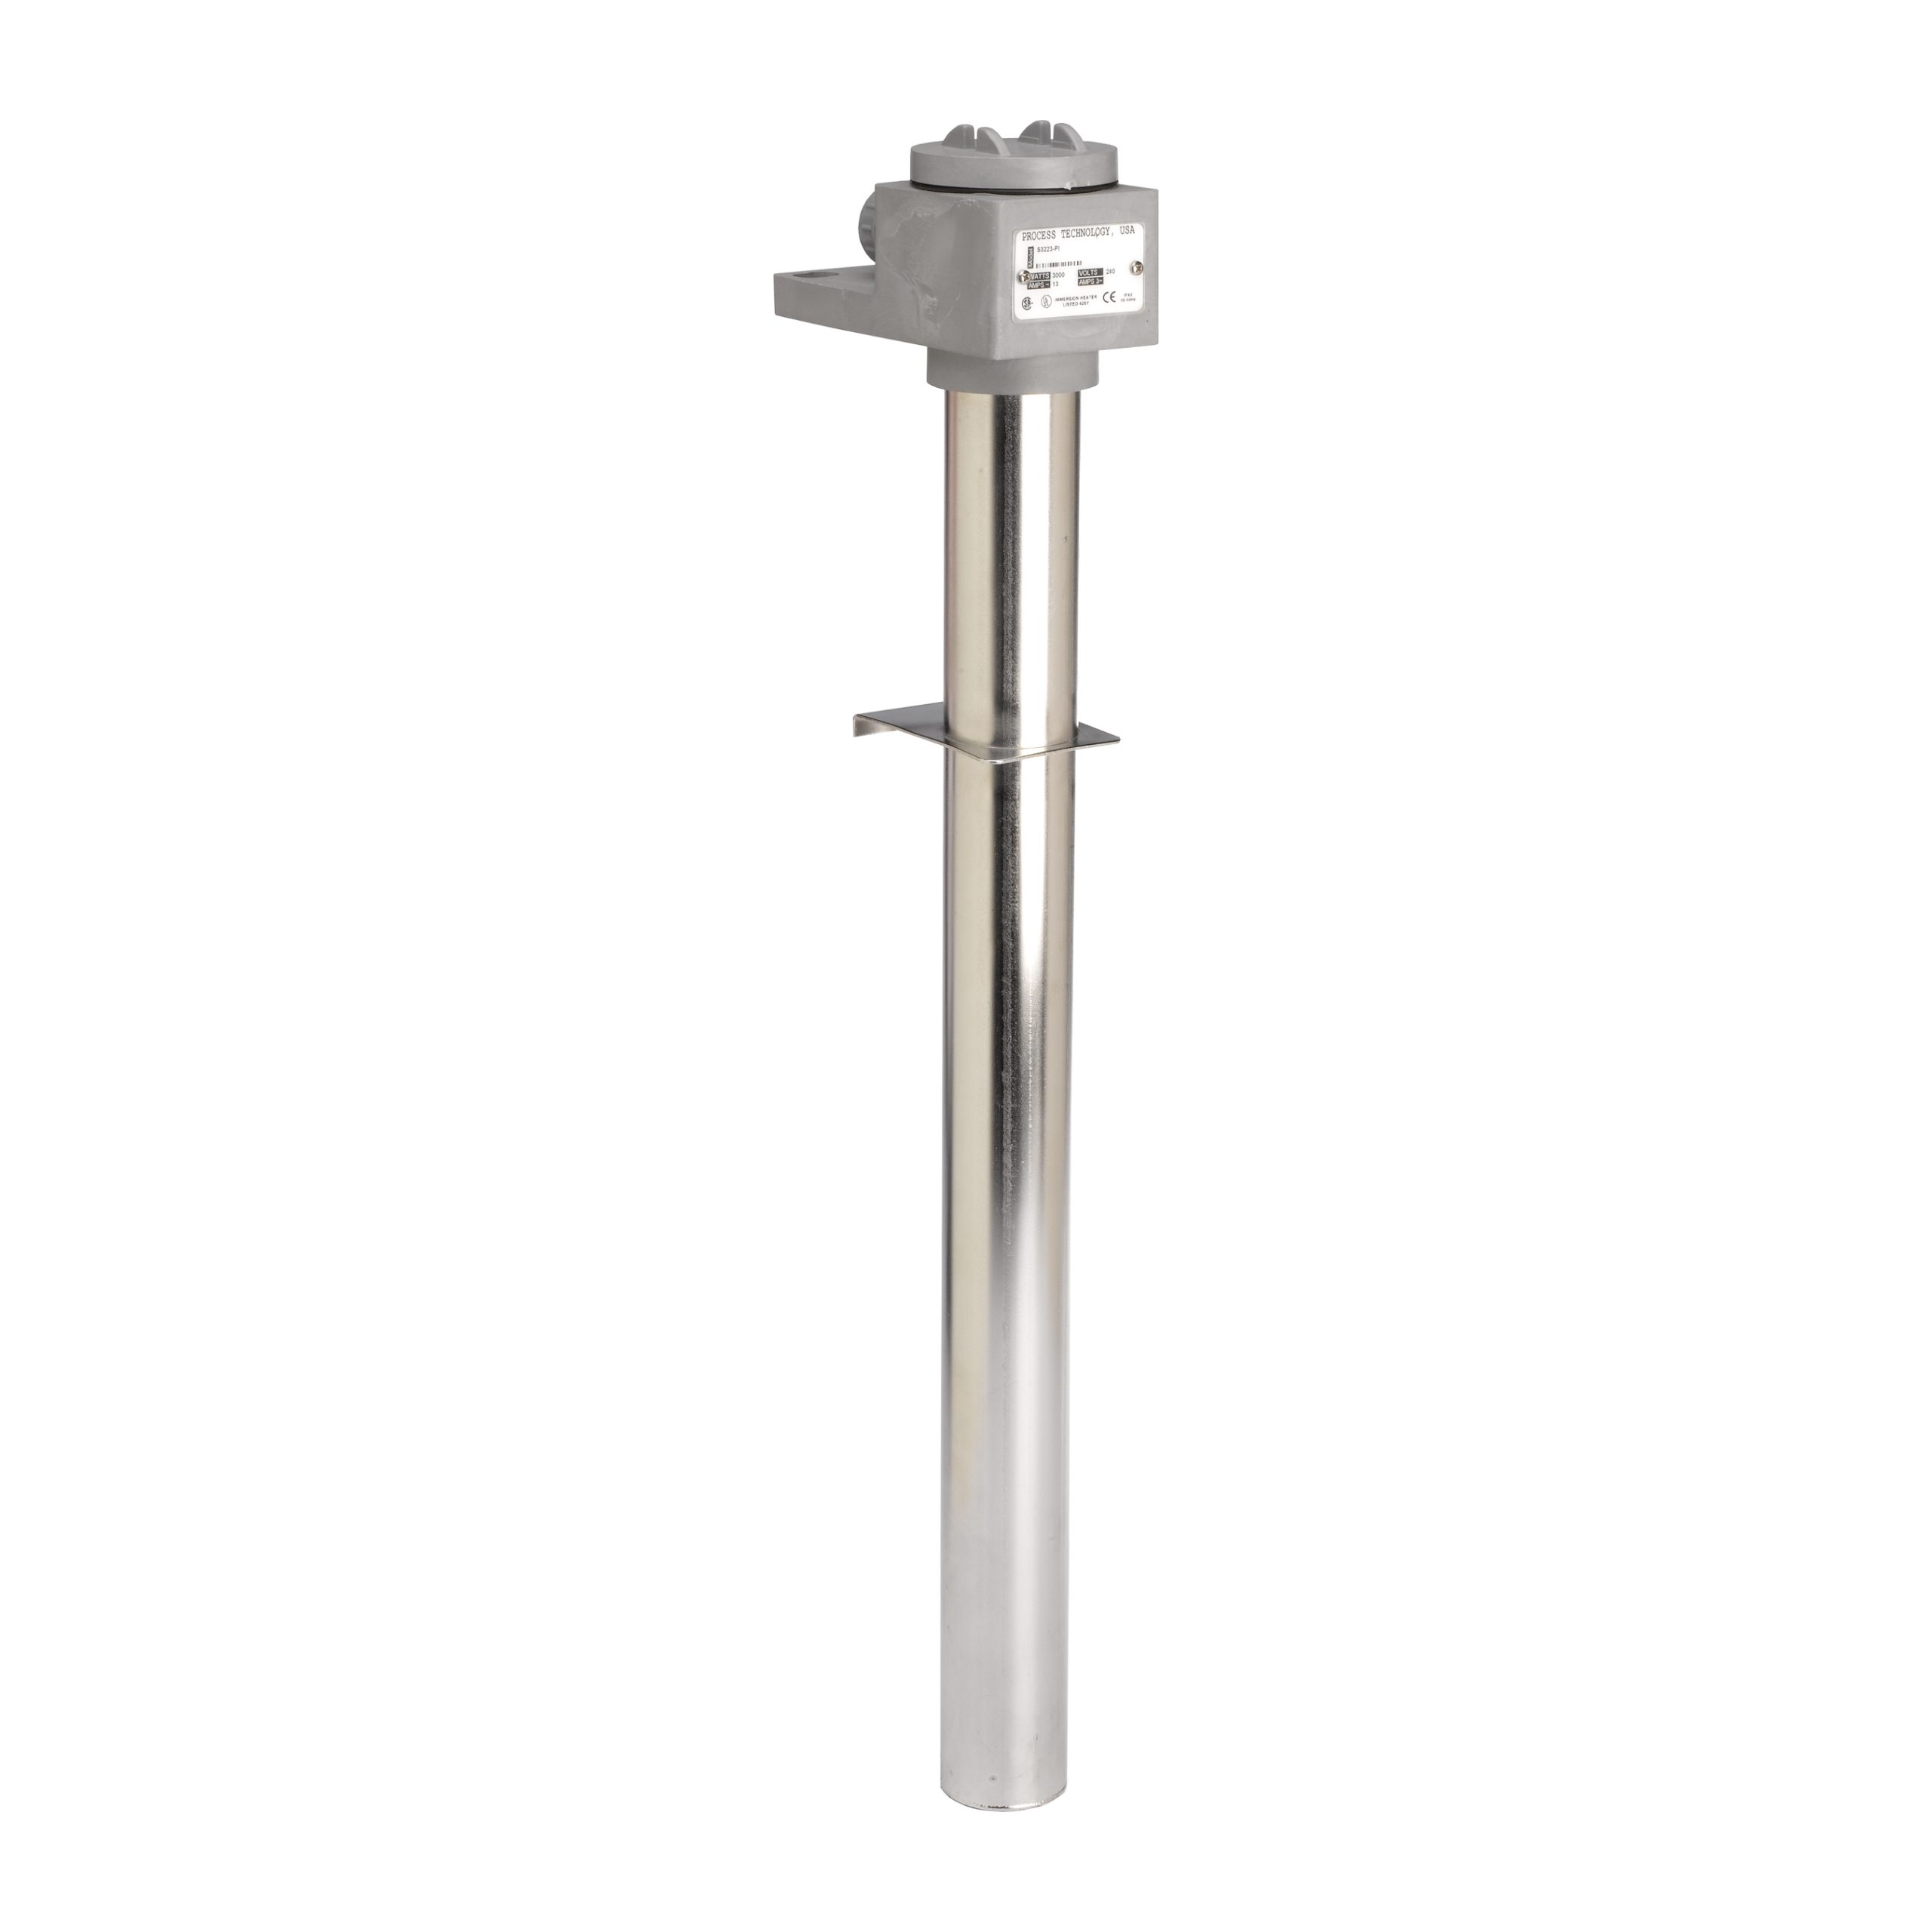 MOTS Single Derated Heater | Metal Tube Immersion Heaters